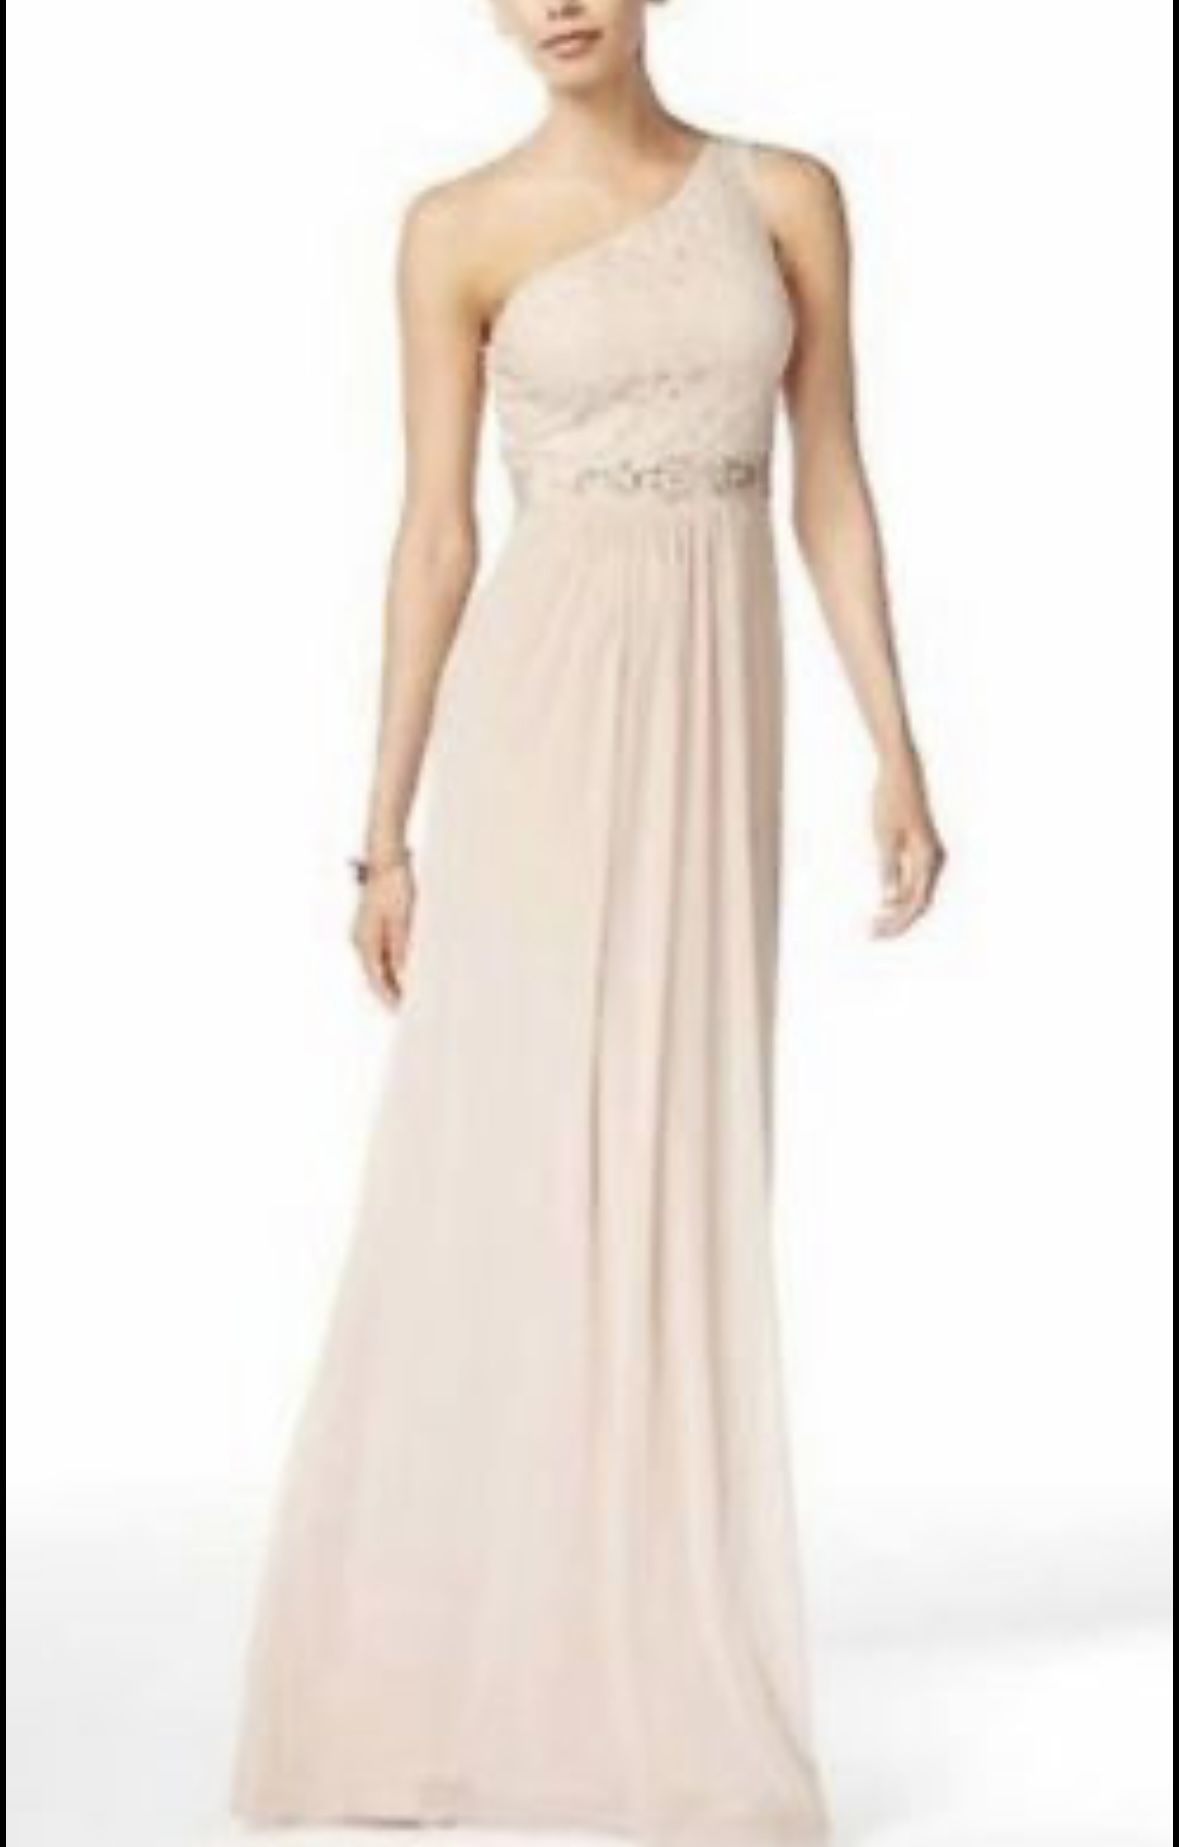 Lk NEW! $179 Adrianna Papell Love Story Bridesmaid Ball one shoulder lace gown size 6